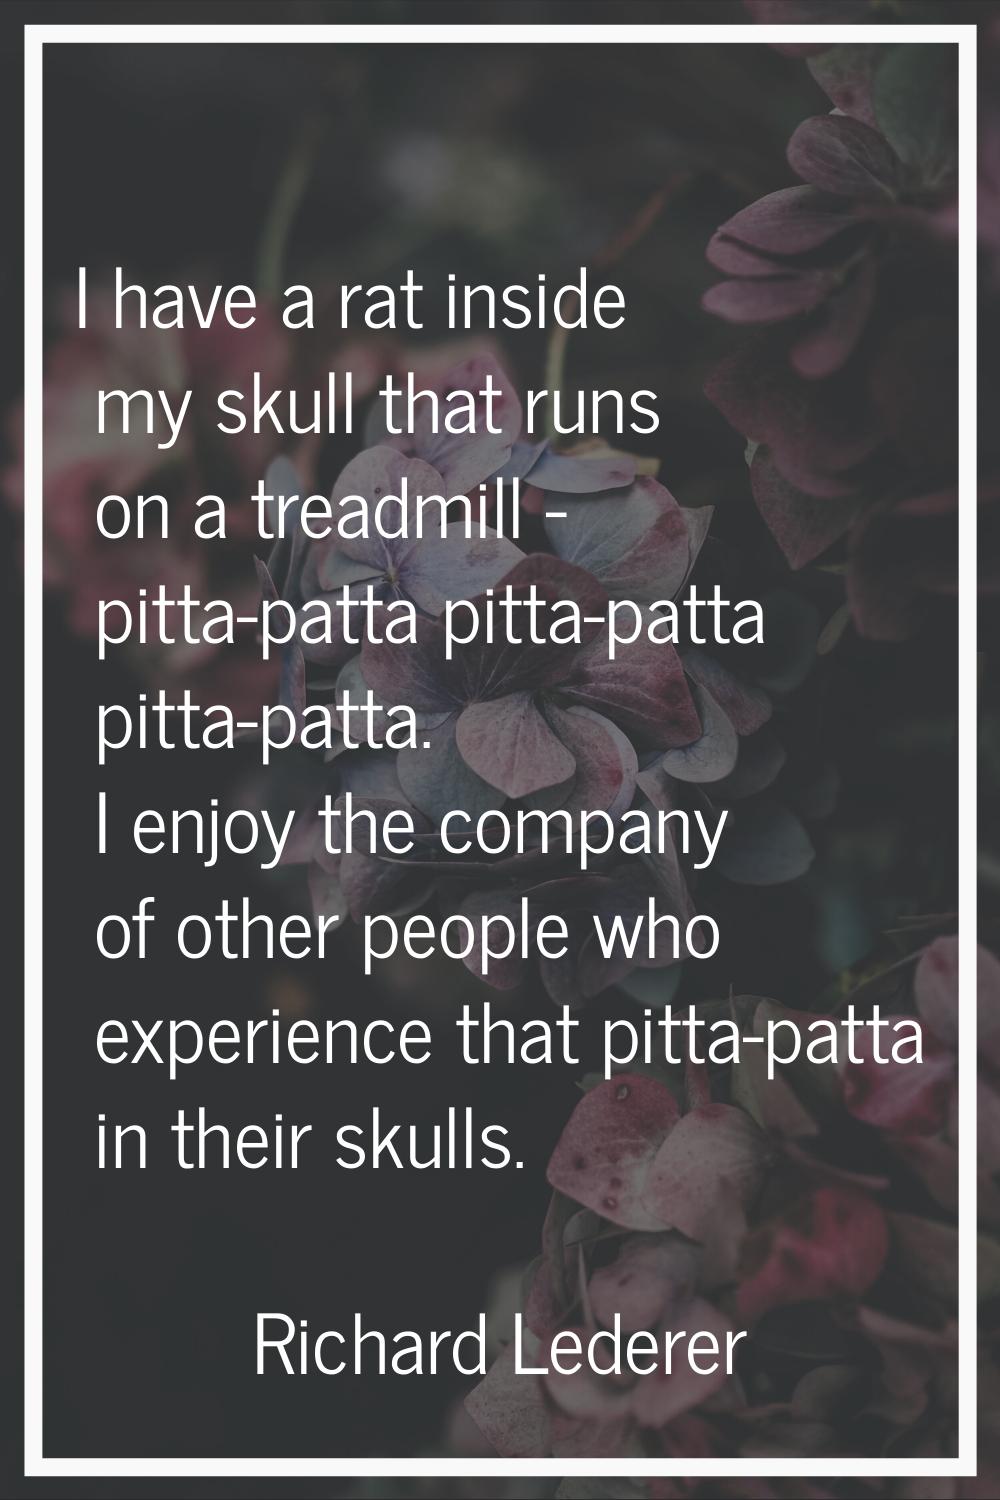 I have a rat inside my skull that runs on a treadmill - pitta-patta pitta-patta pitta-patta. I enjo